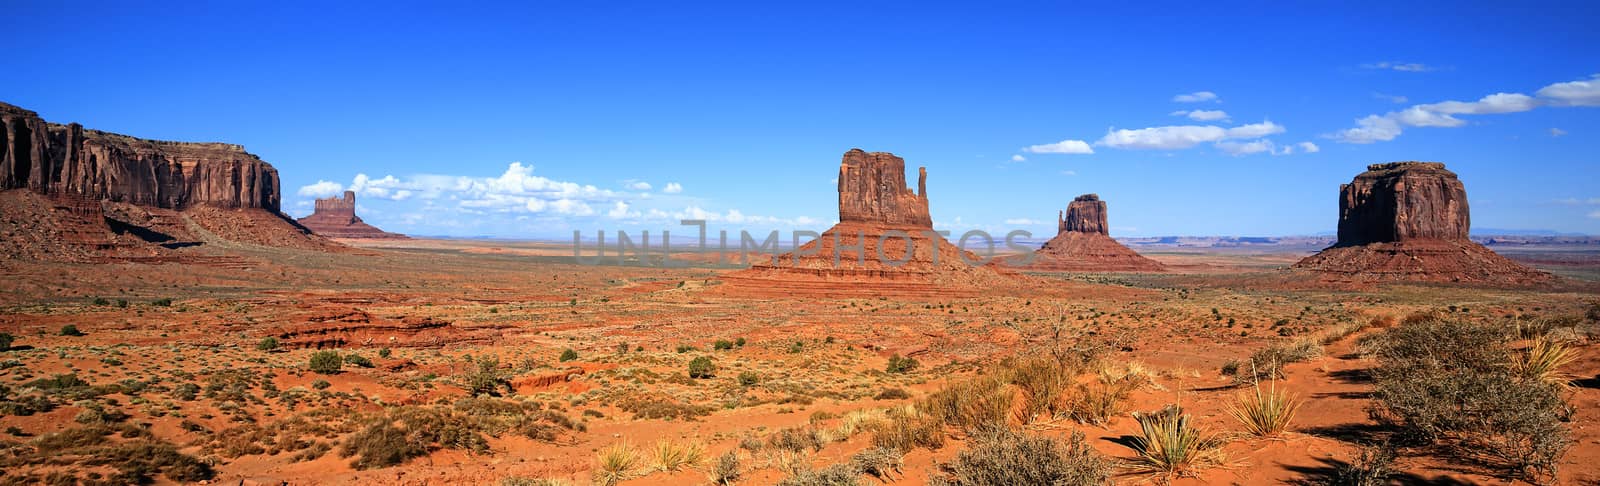 panomaric view of Monument Valley by vwalakte